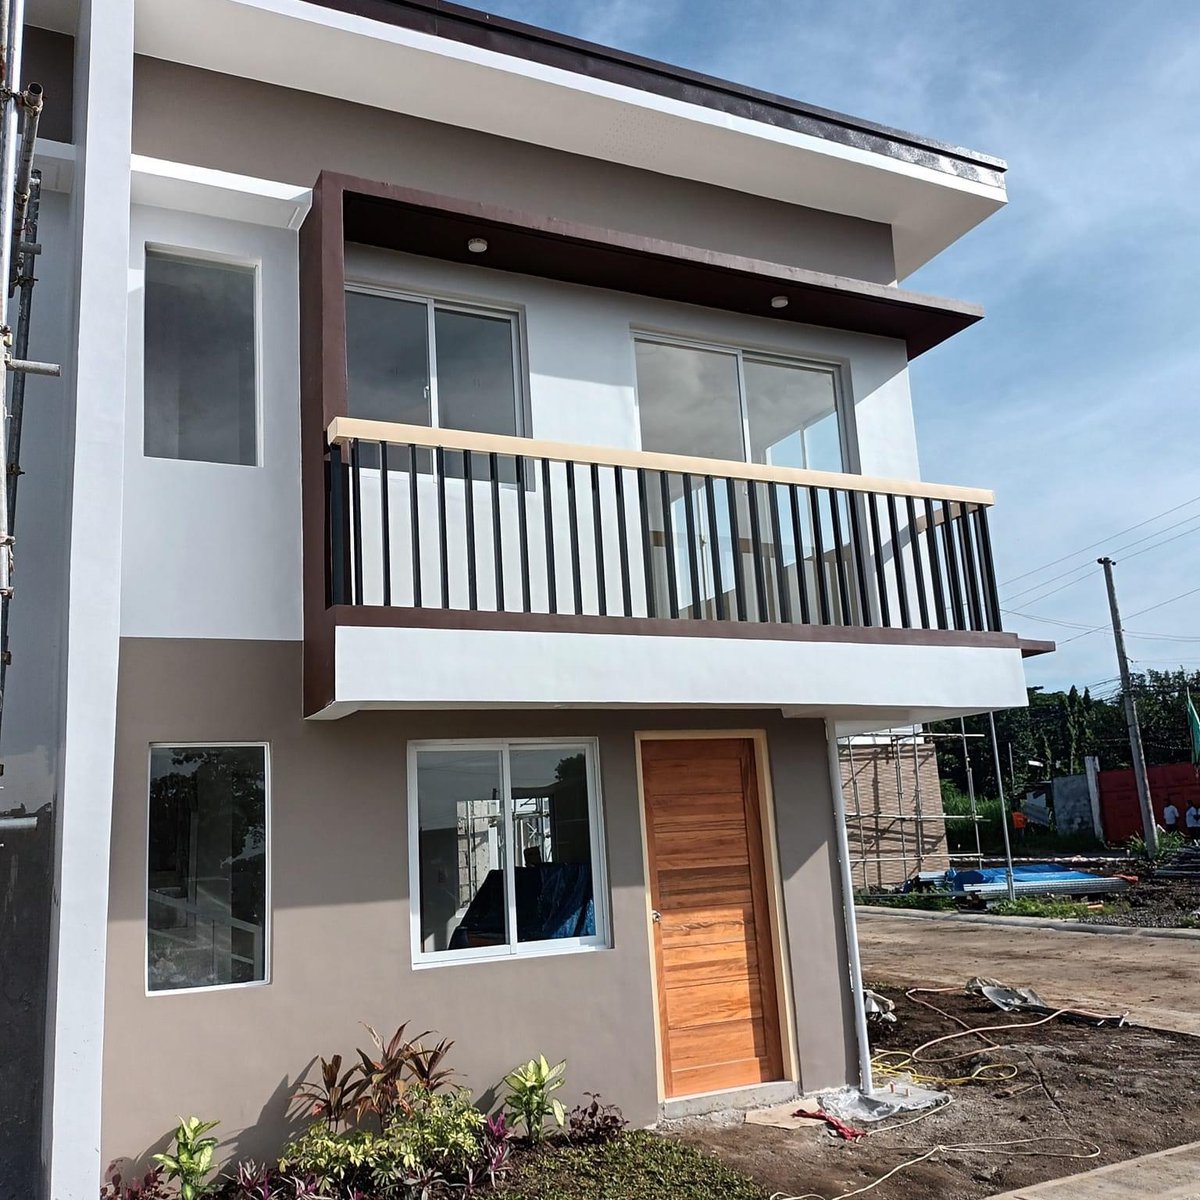 3 Bedroom Townhouse For Sale in Lipa Batangas